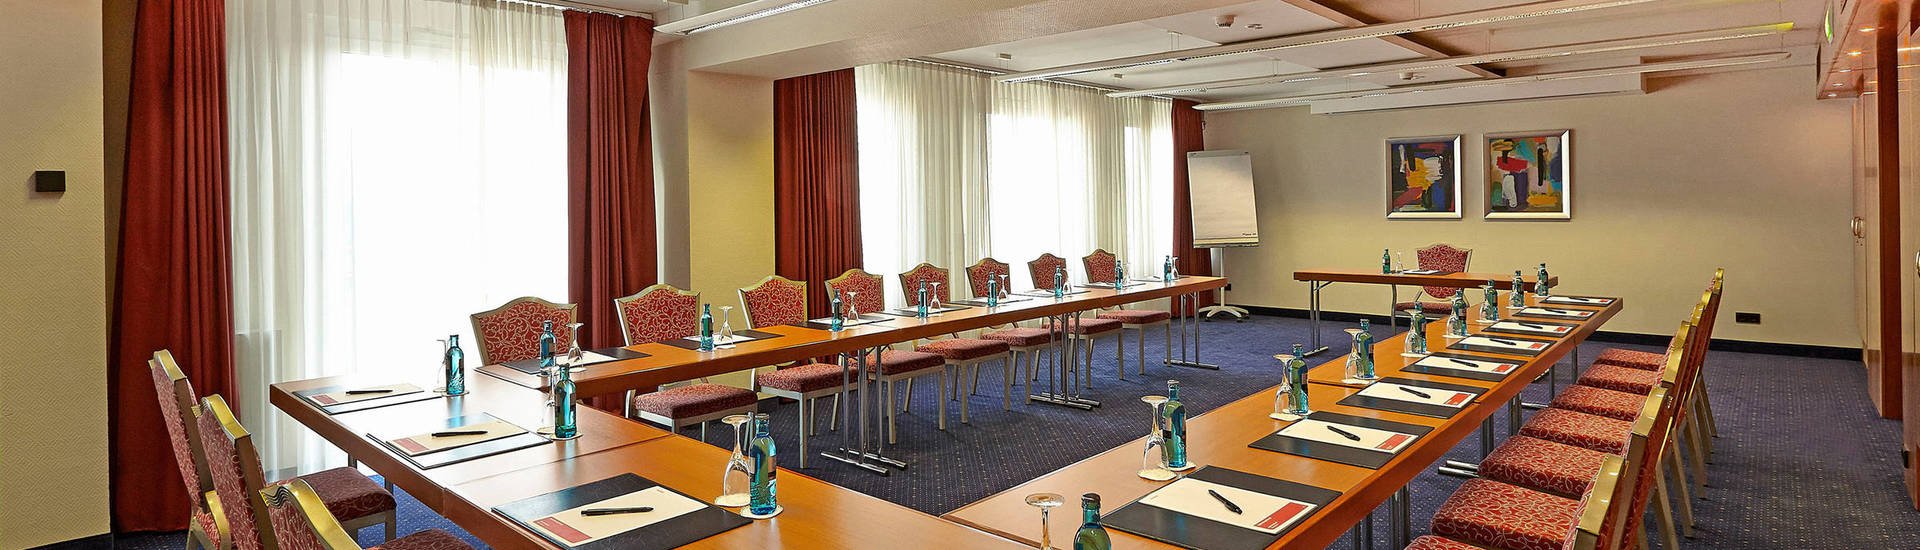 Hyperion Hotel Berlin - Your hotel for conferences and seminars - Official website